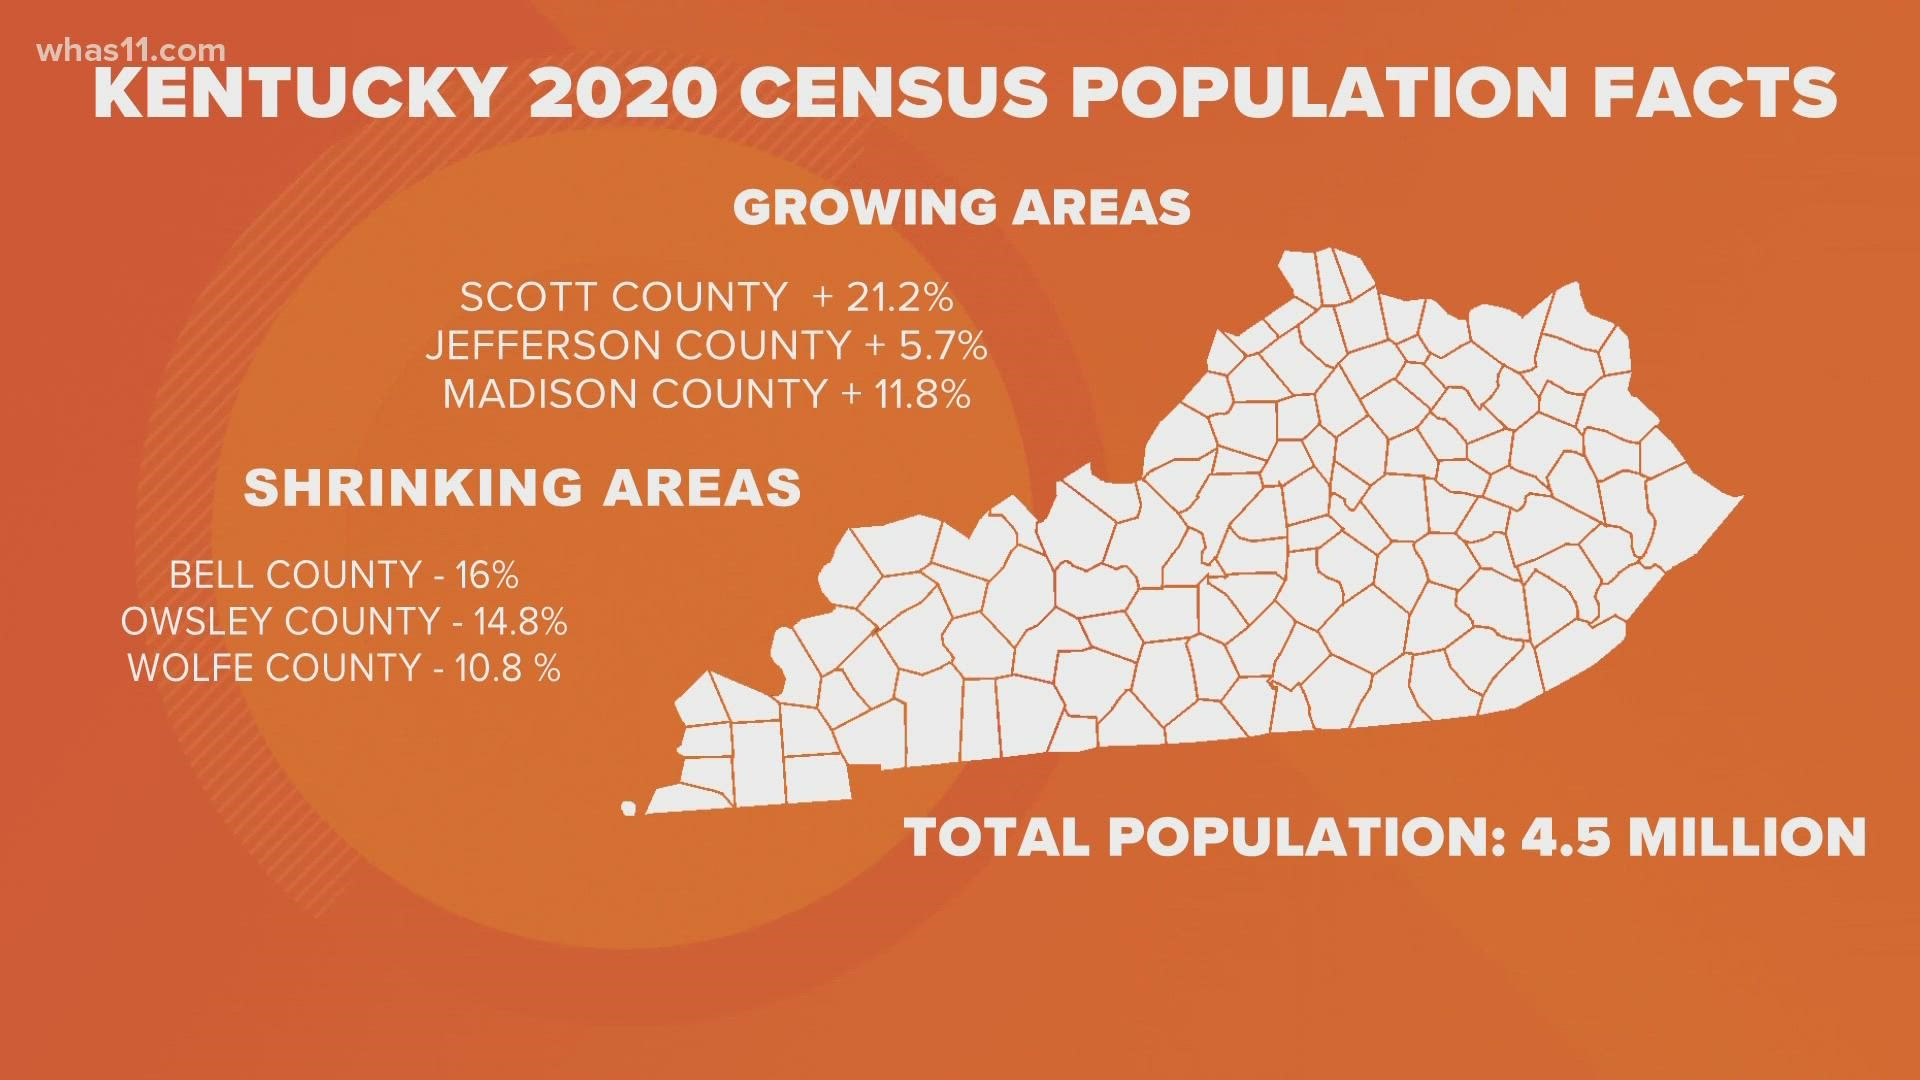 The 2020 Census data shows that both Kentucky and Indiana had a pretty good decade.